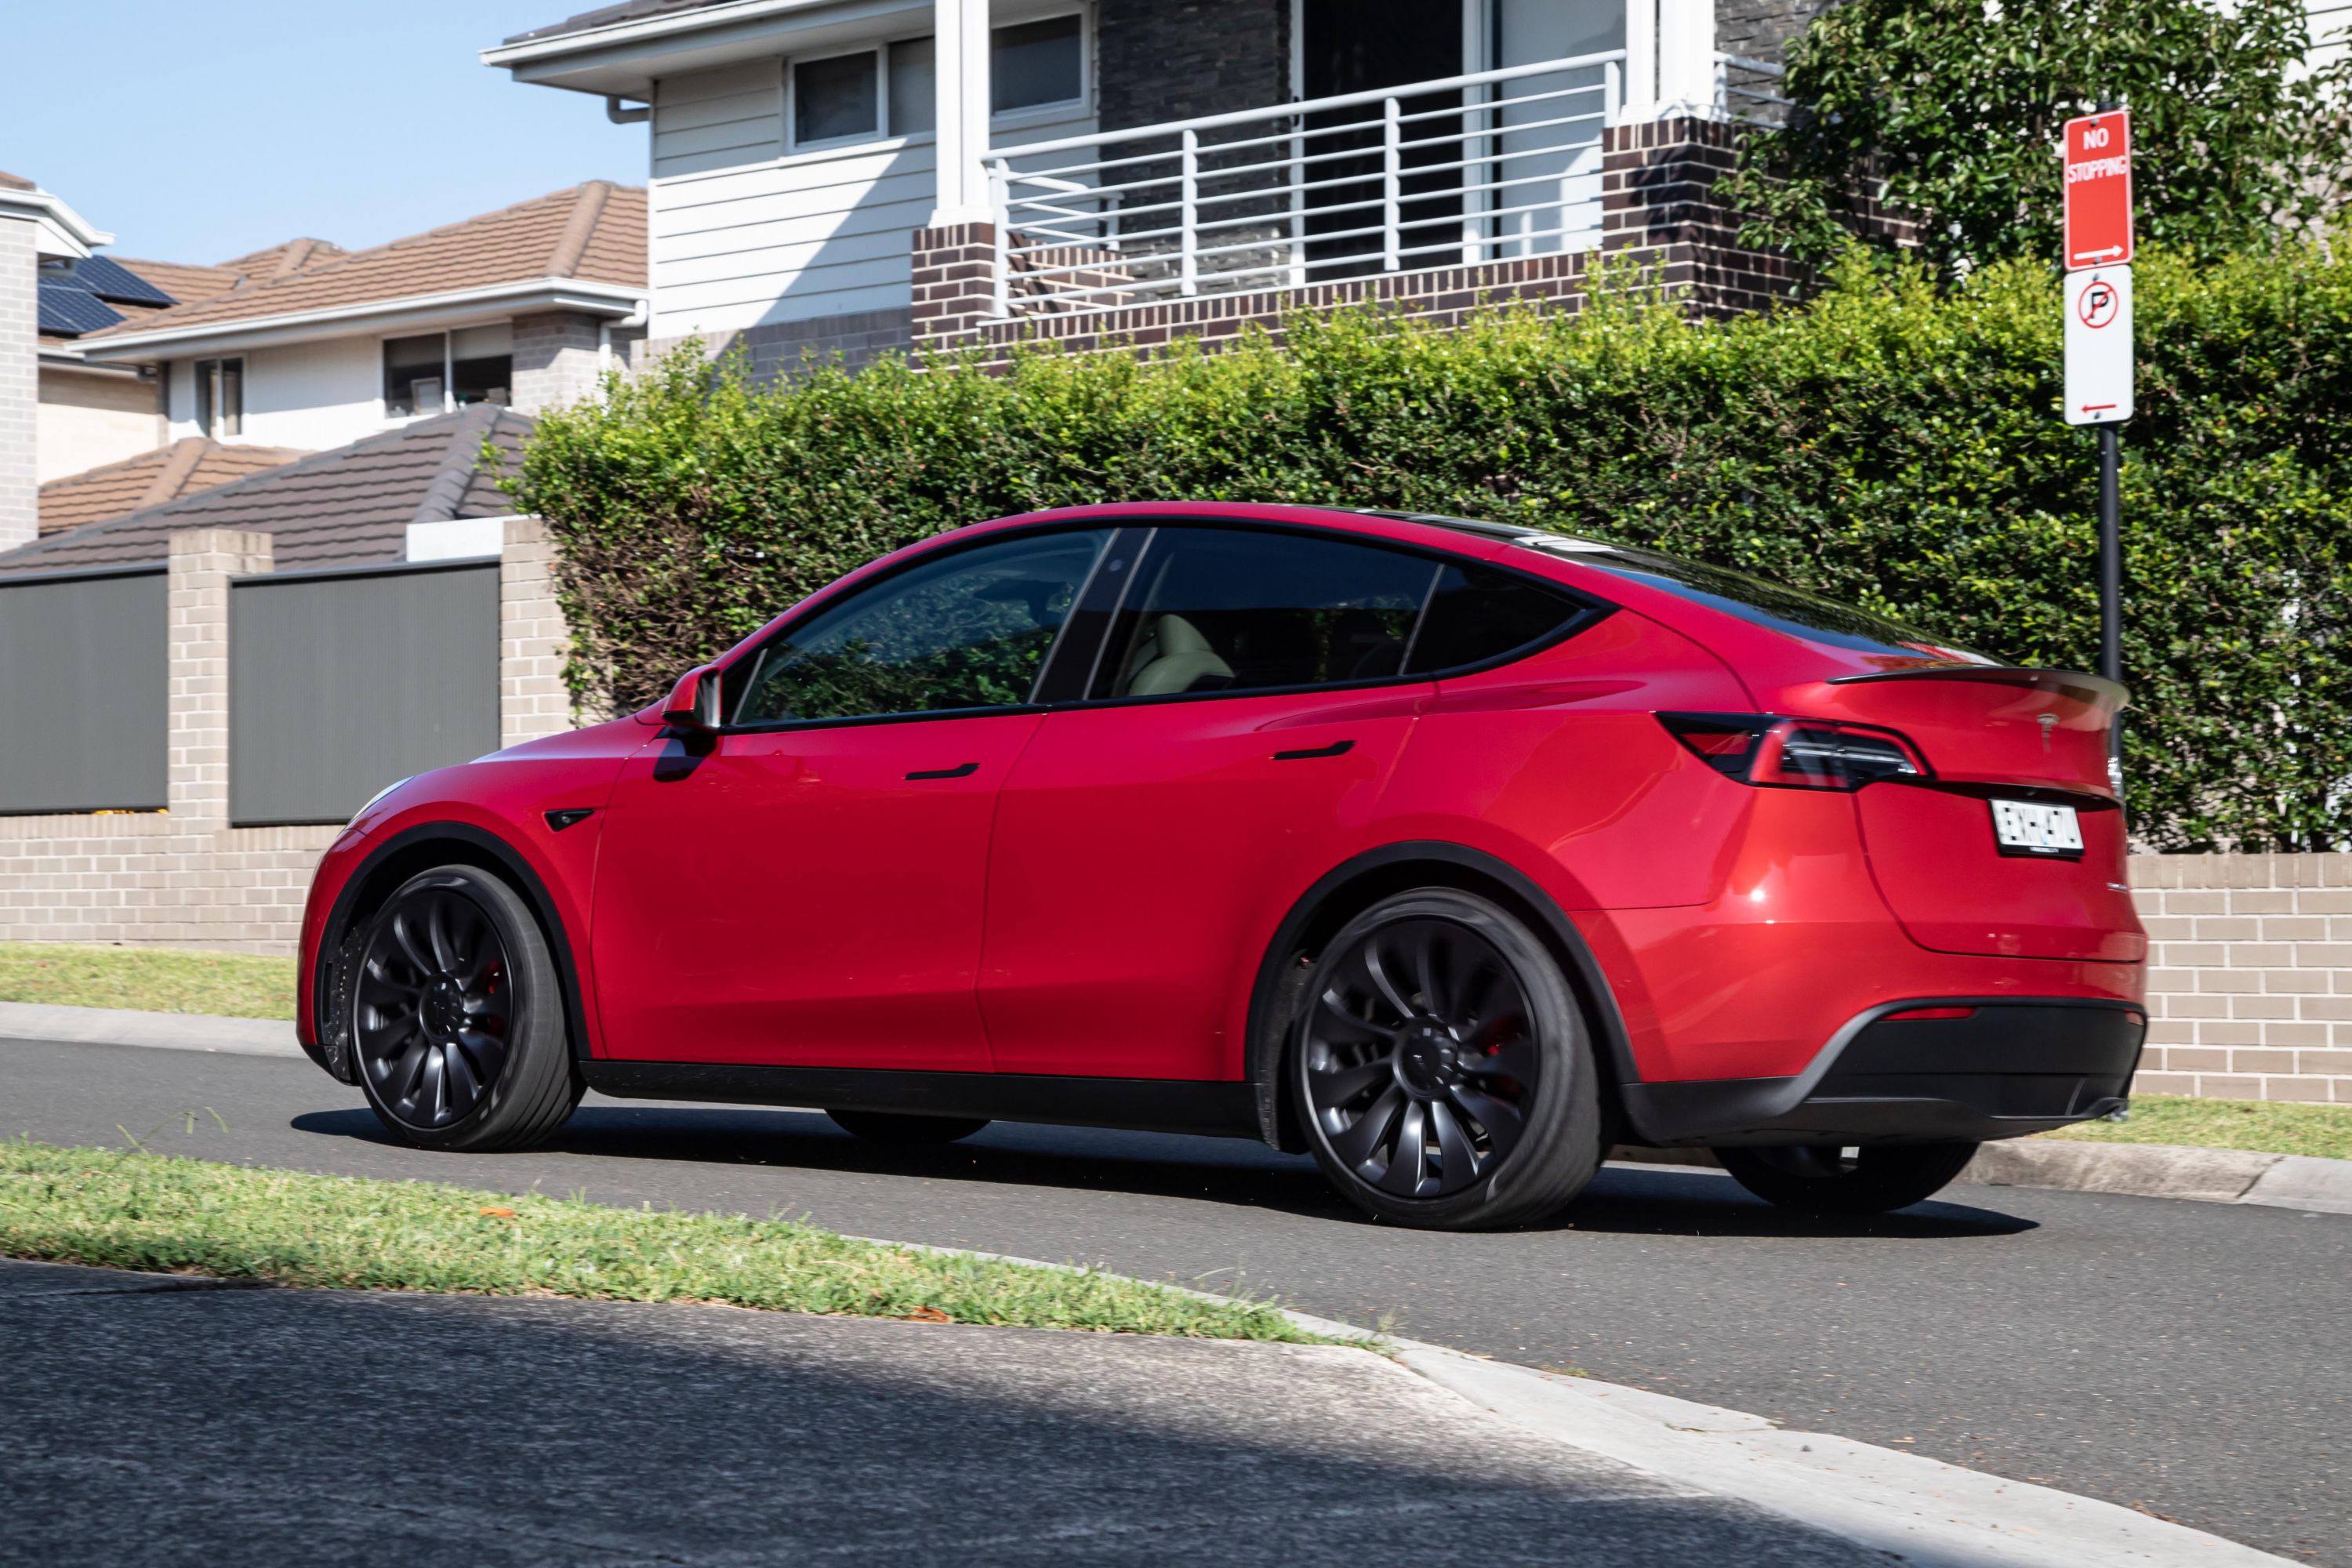 Could this be our first look at the updated Tesla Model Y? CarExpert